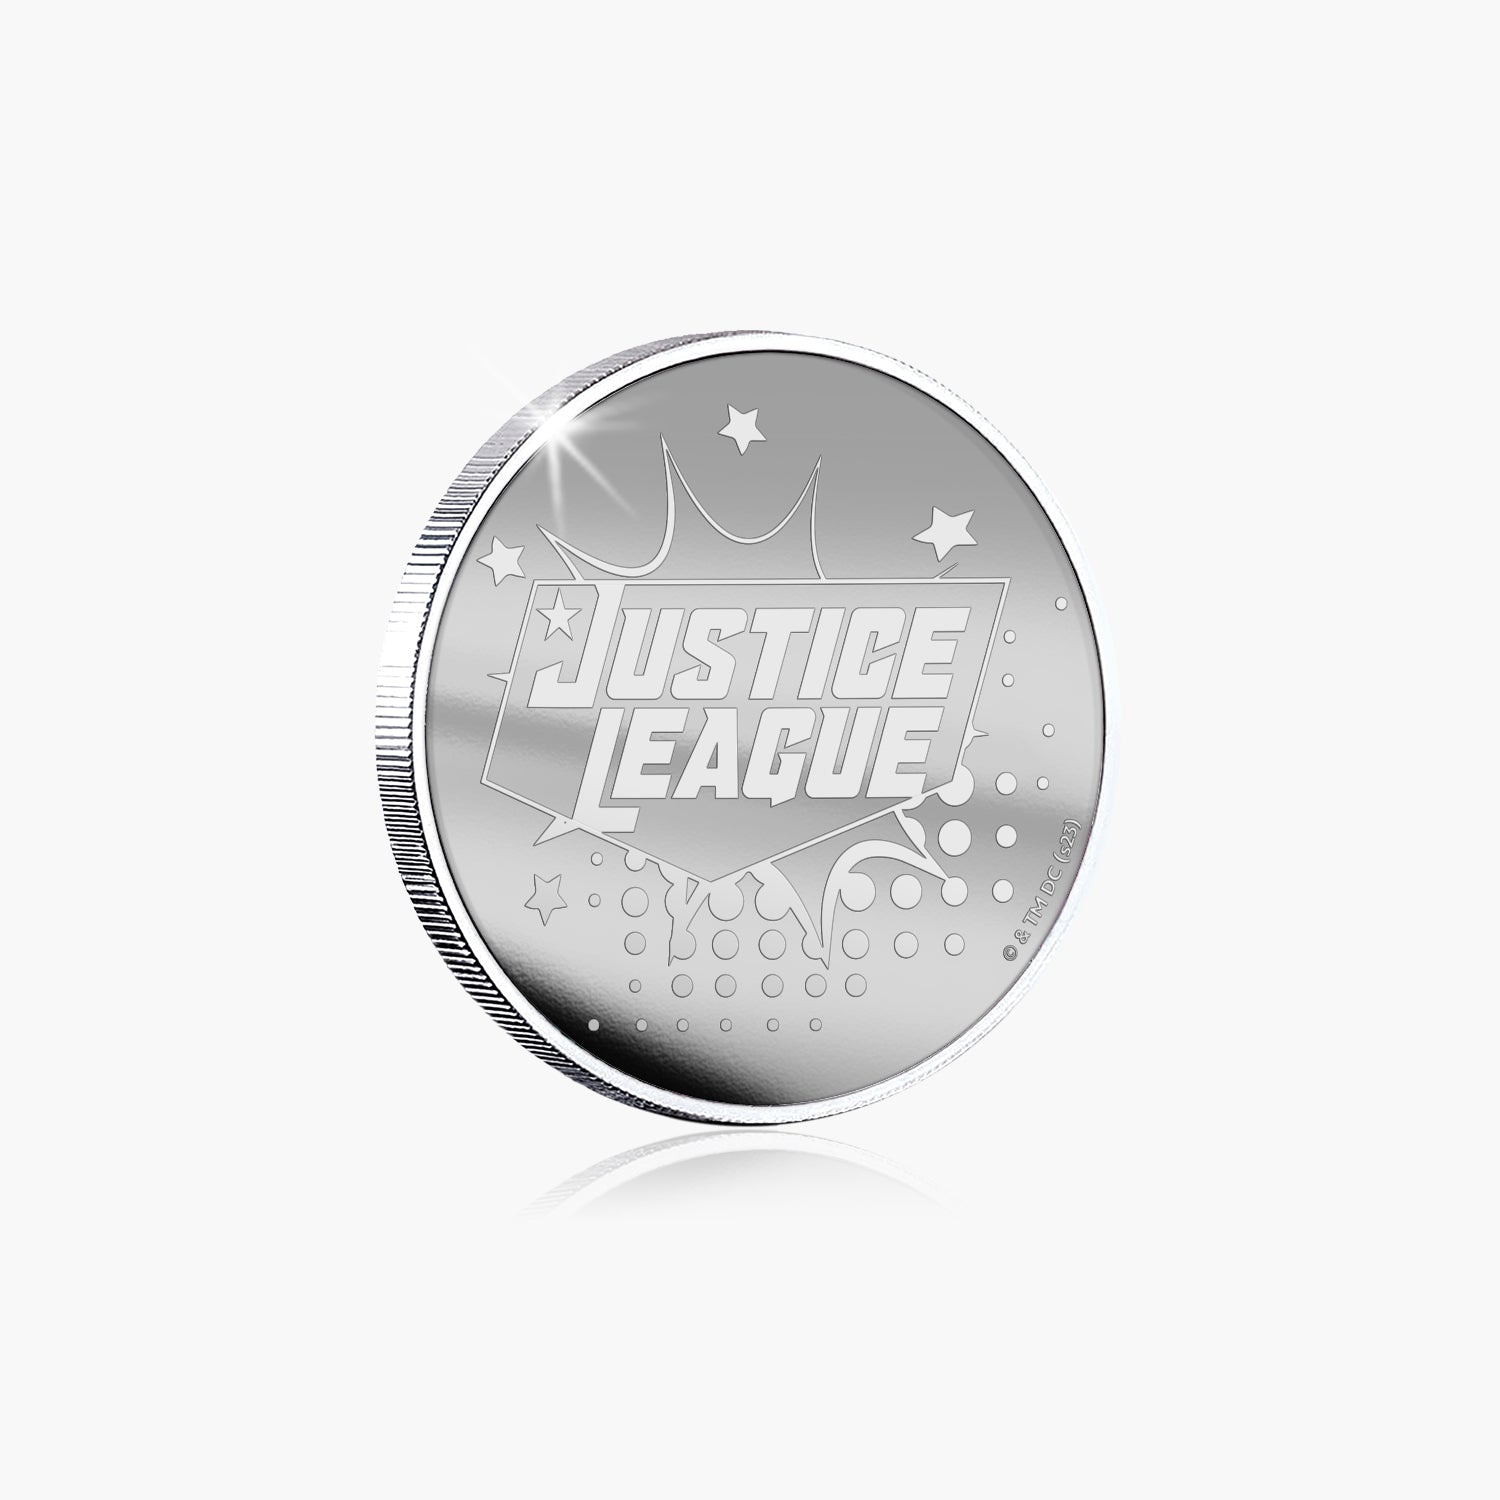 Justice League - The Flash - Cyborg - Green Lantern Silver Plated Commemorative